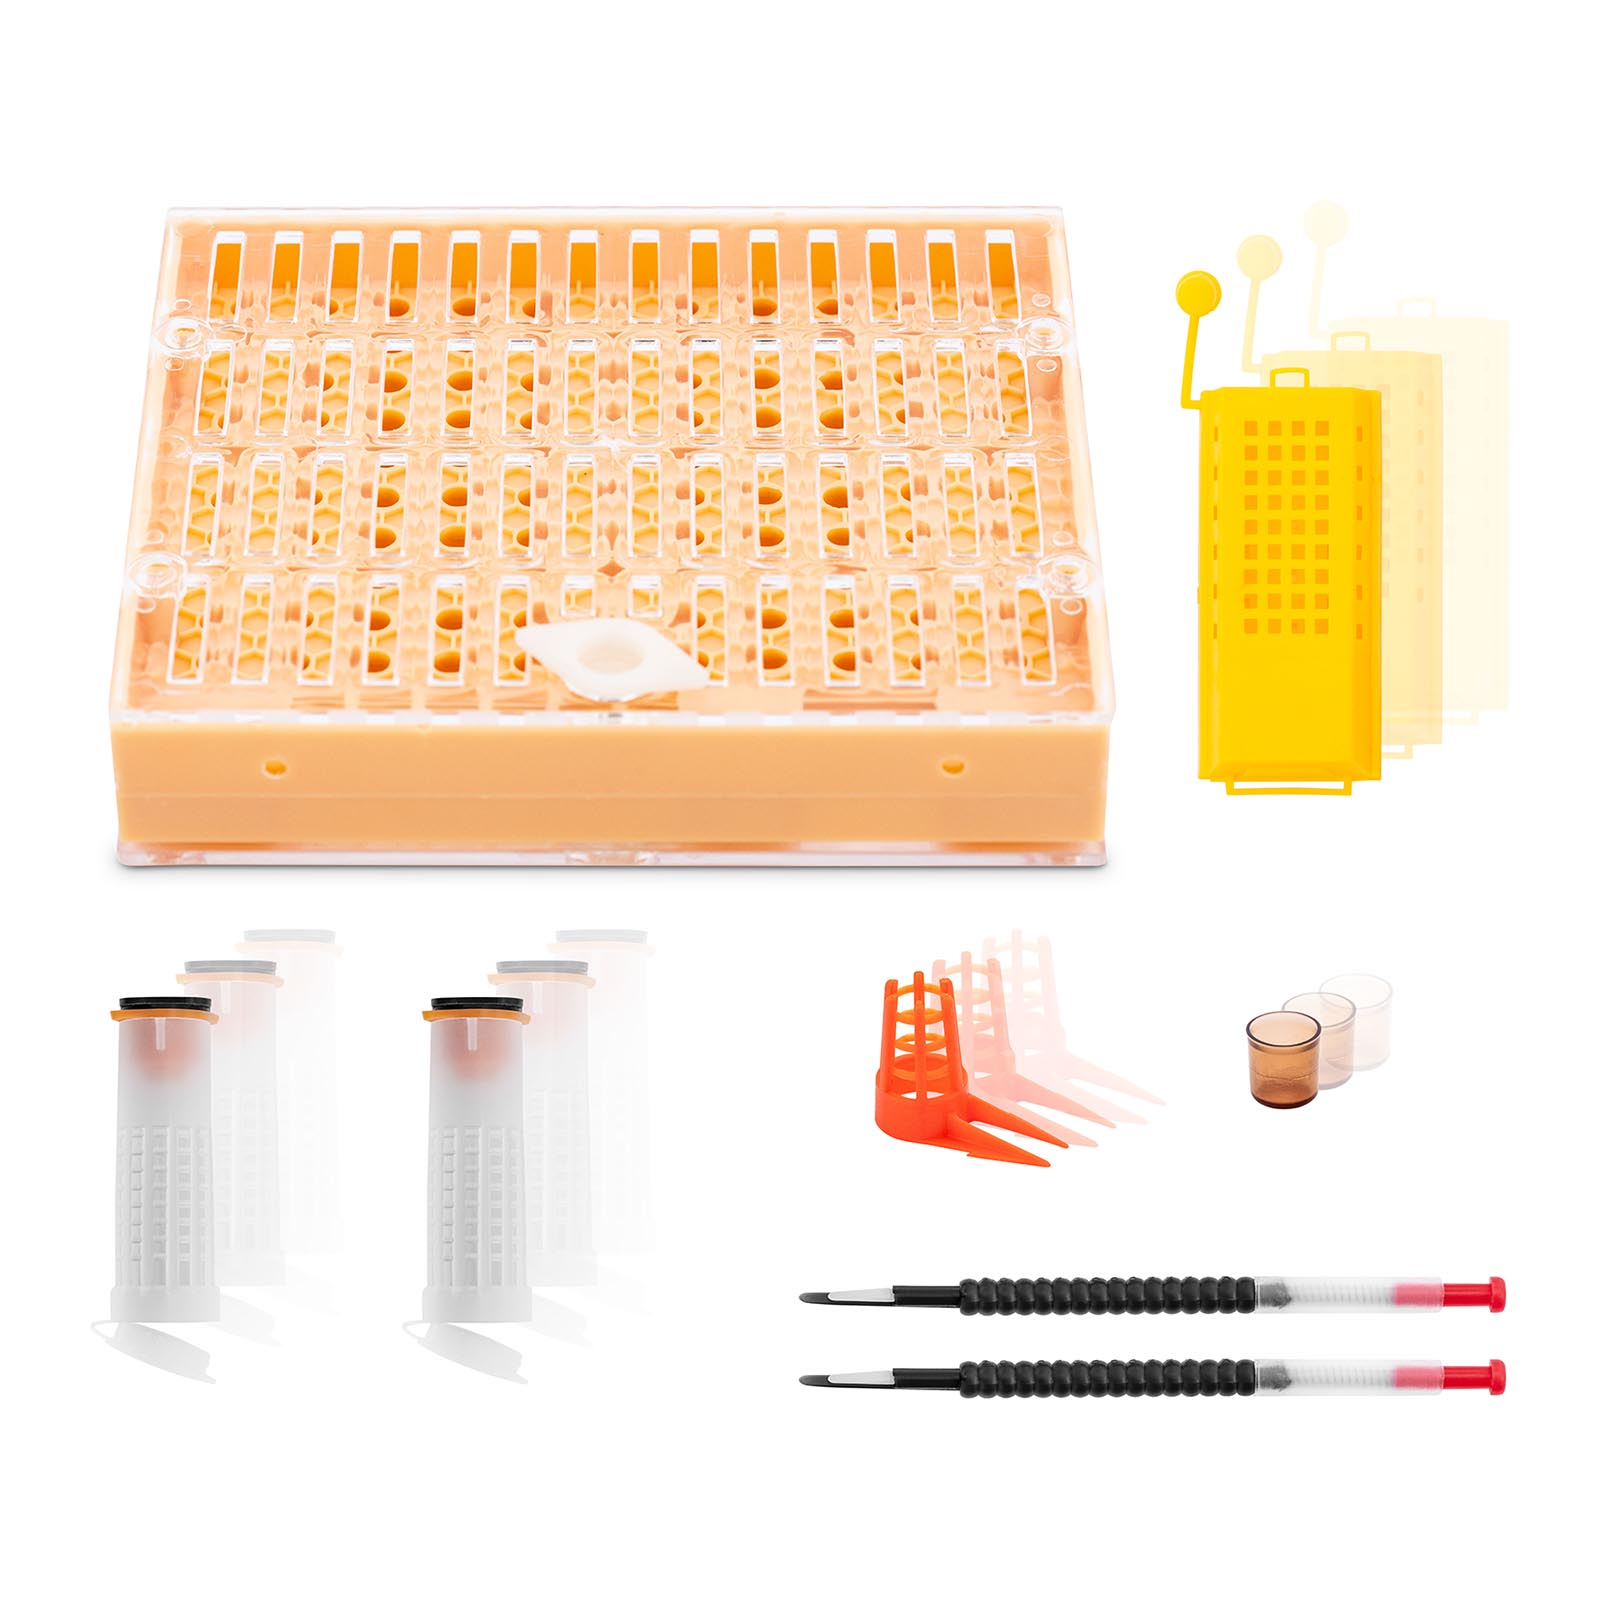 Beekeeping Starter Kit - queen rearing - 322-pcs - transfer spoon - cell cups - hatching cells